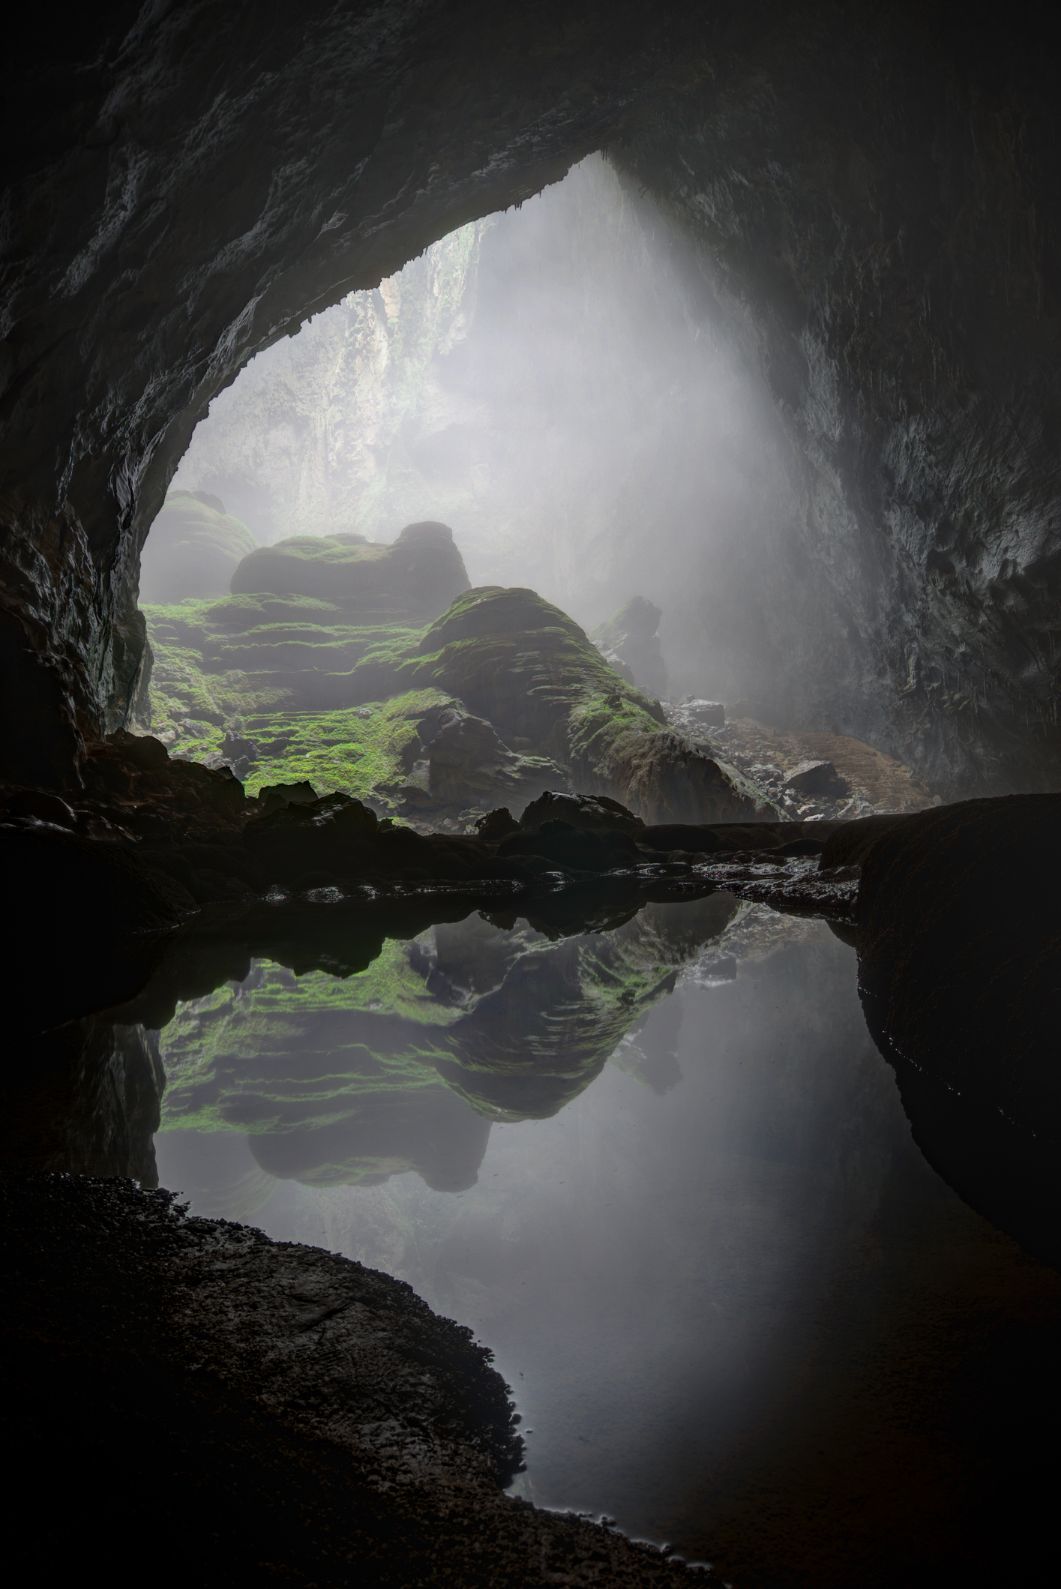 Son Doong Cave is the largest cave in the world